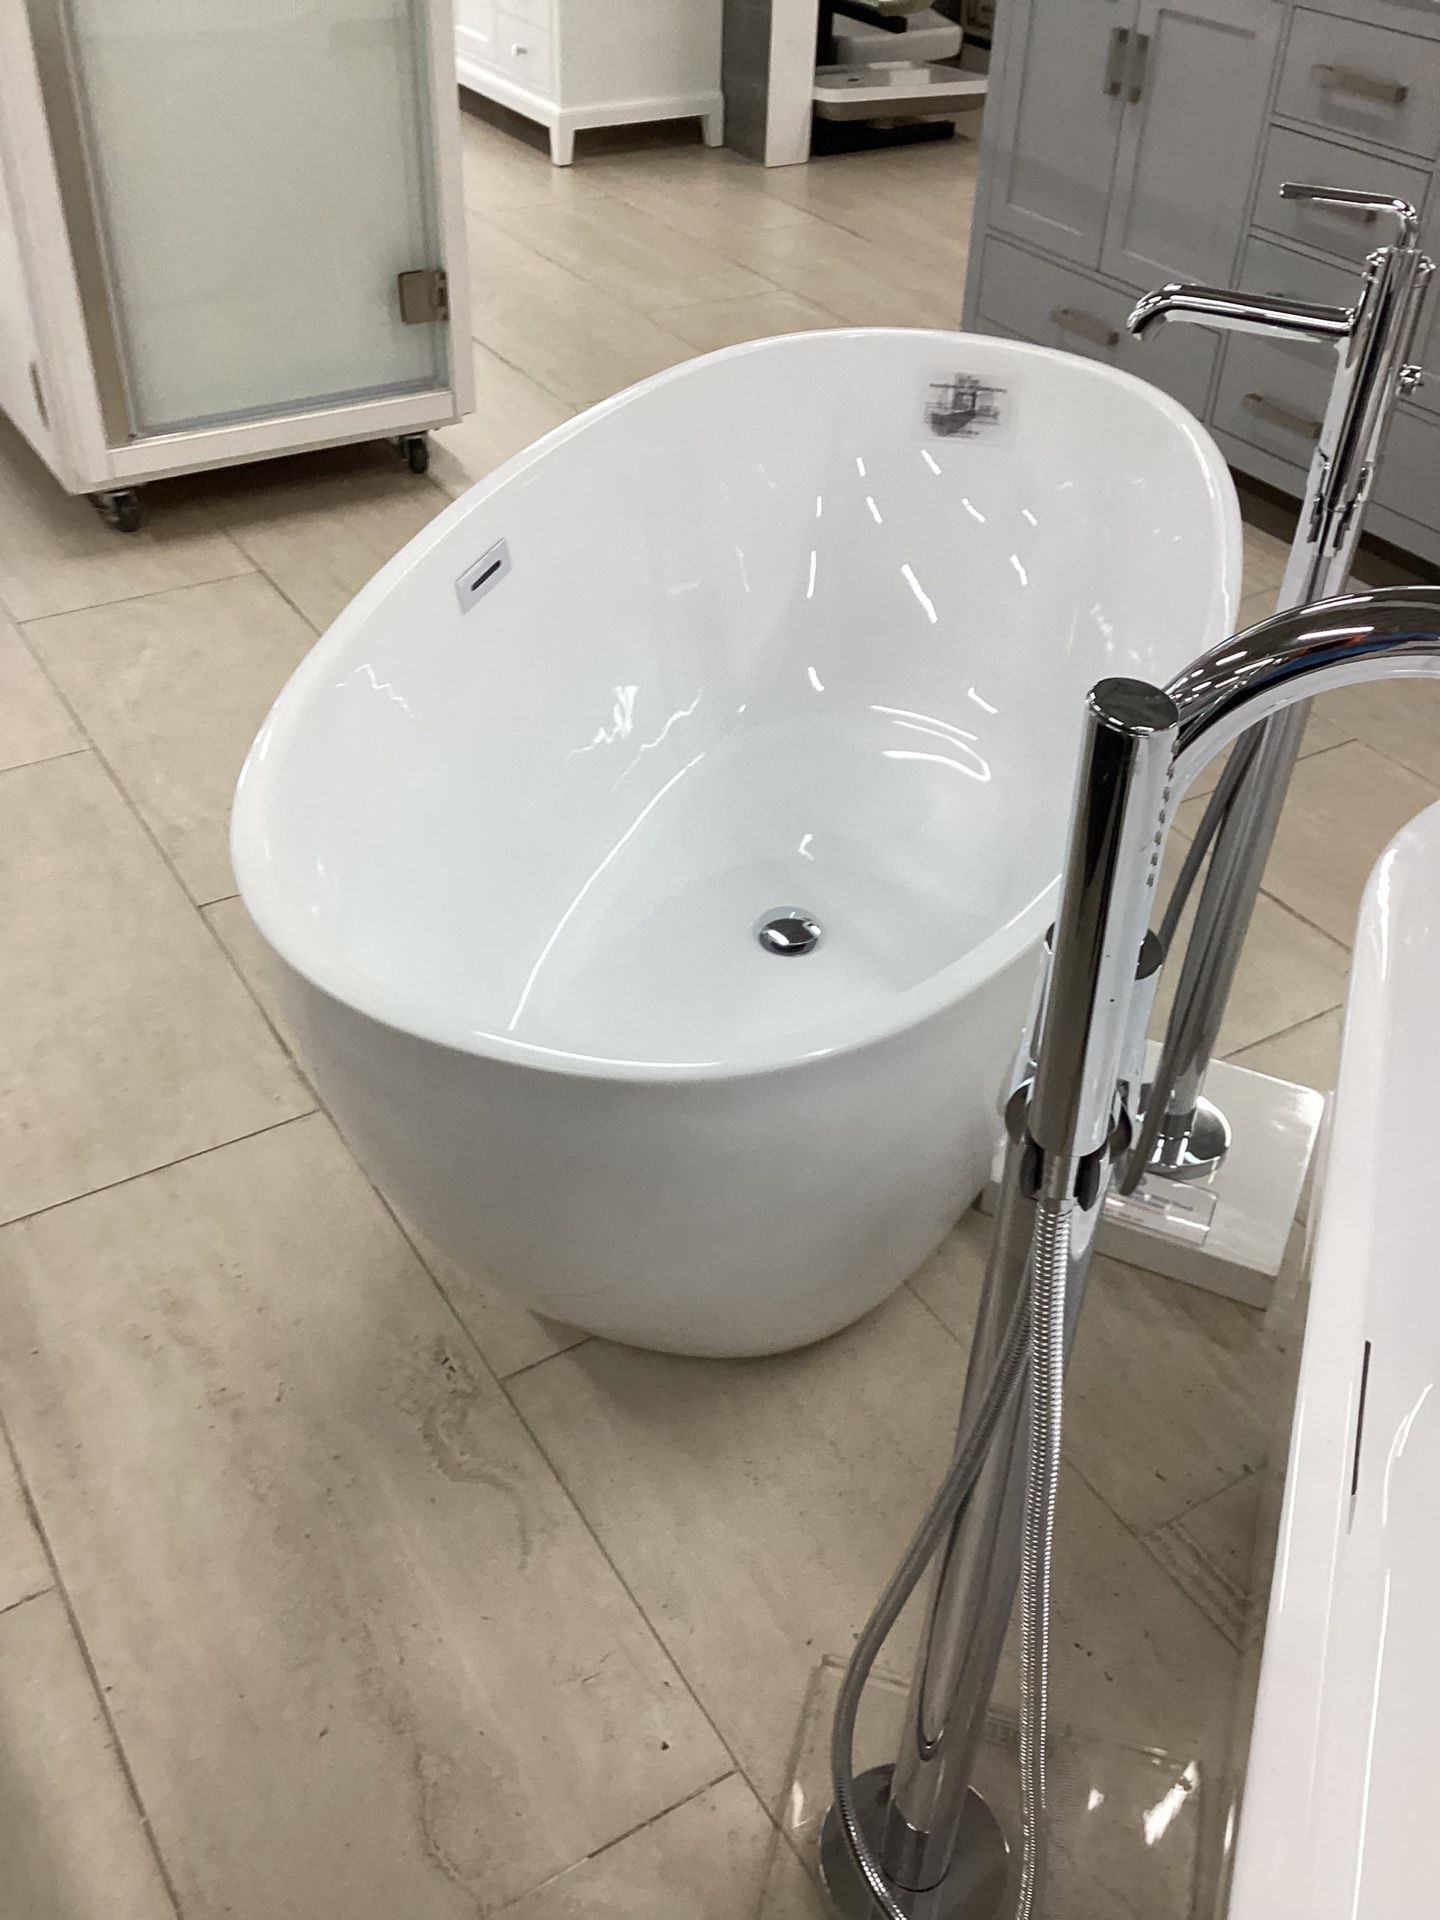 59” Freestanding Bathtub New One Piece Acrylic White Color Ready For Pick Up Today $750